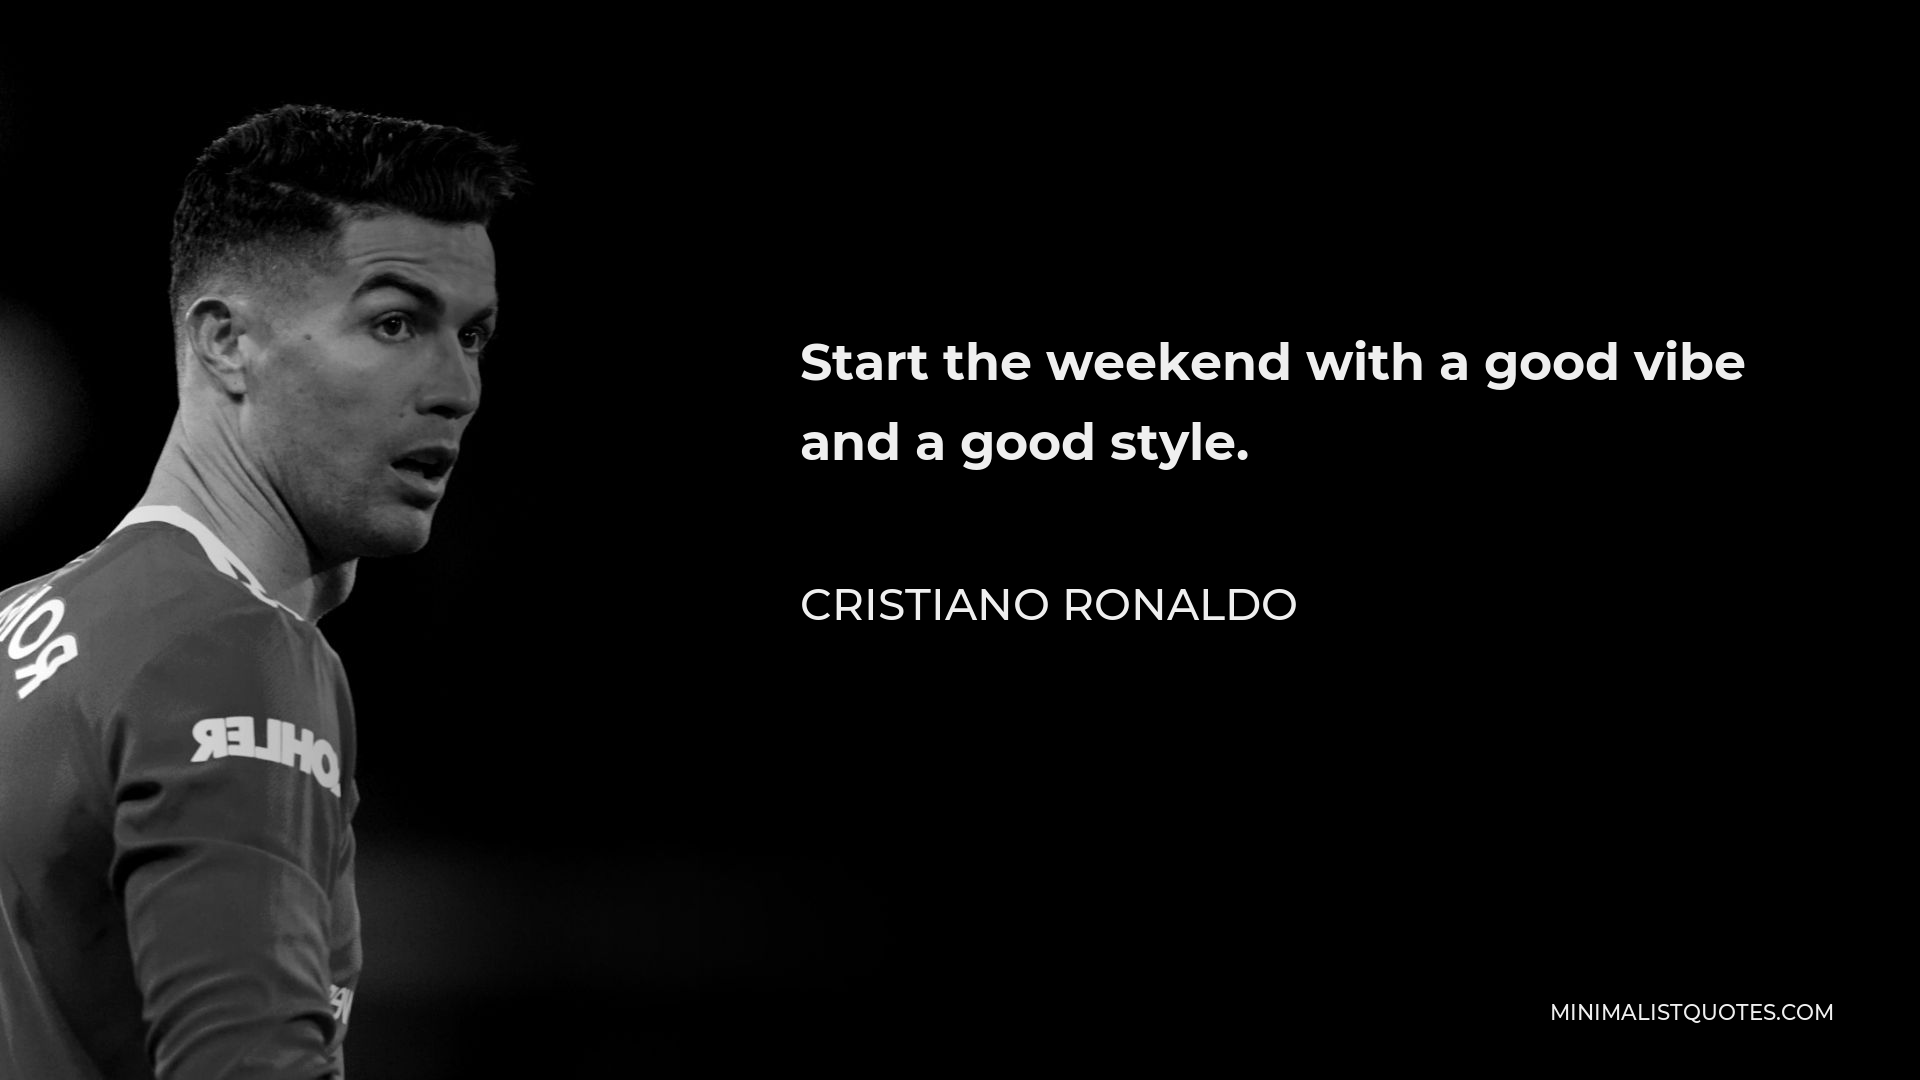 Cristiano Ronaldo Quote - Start the weekend with a good vibe and a good style.